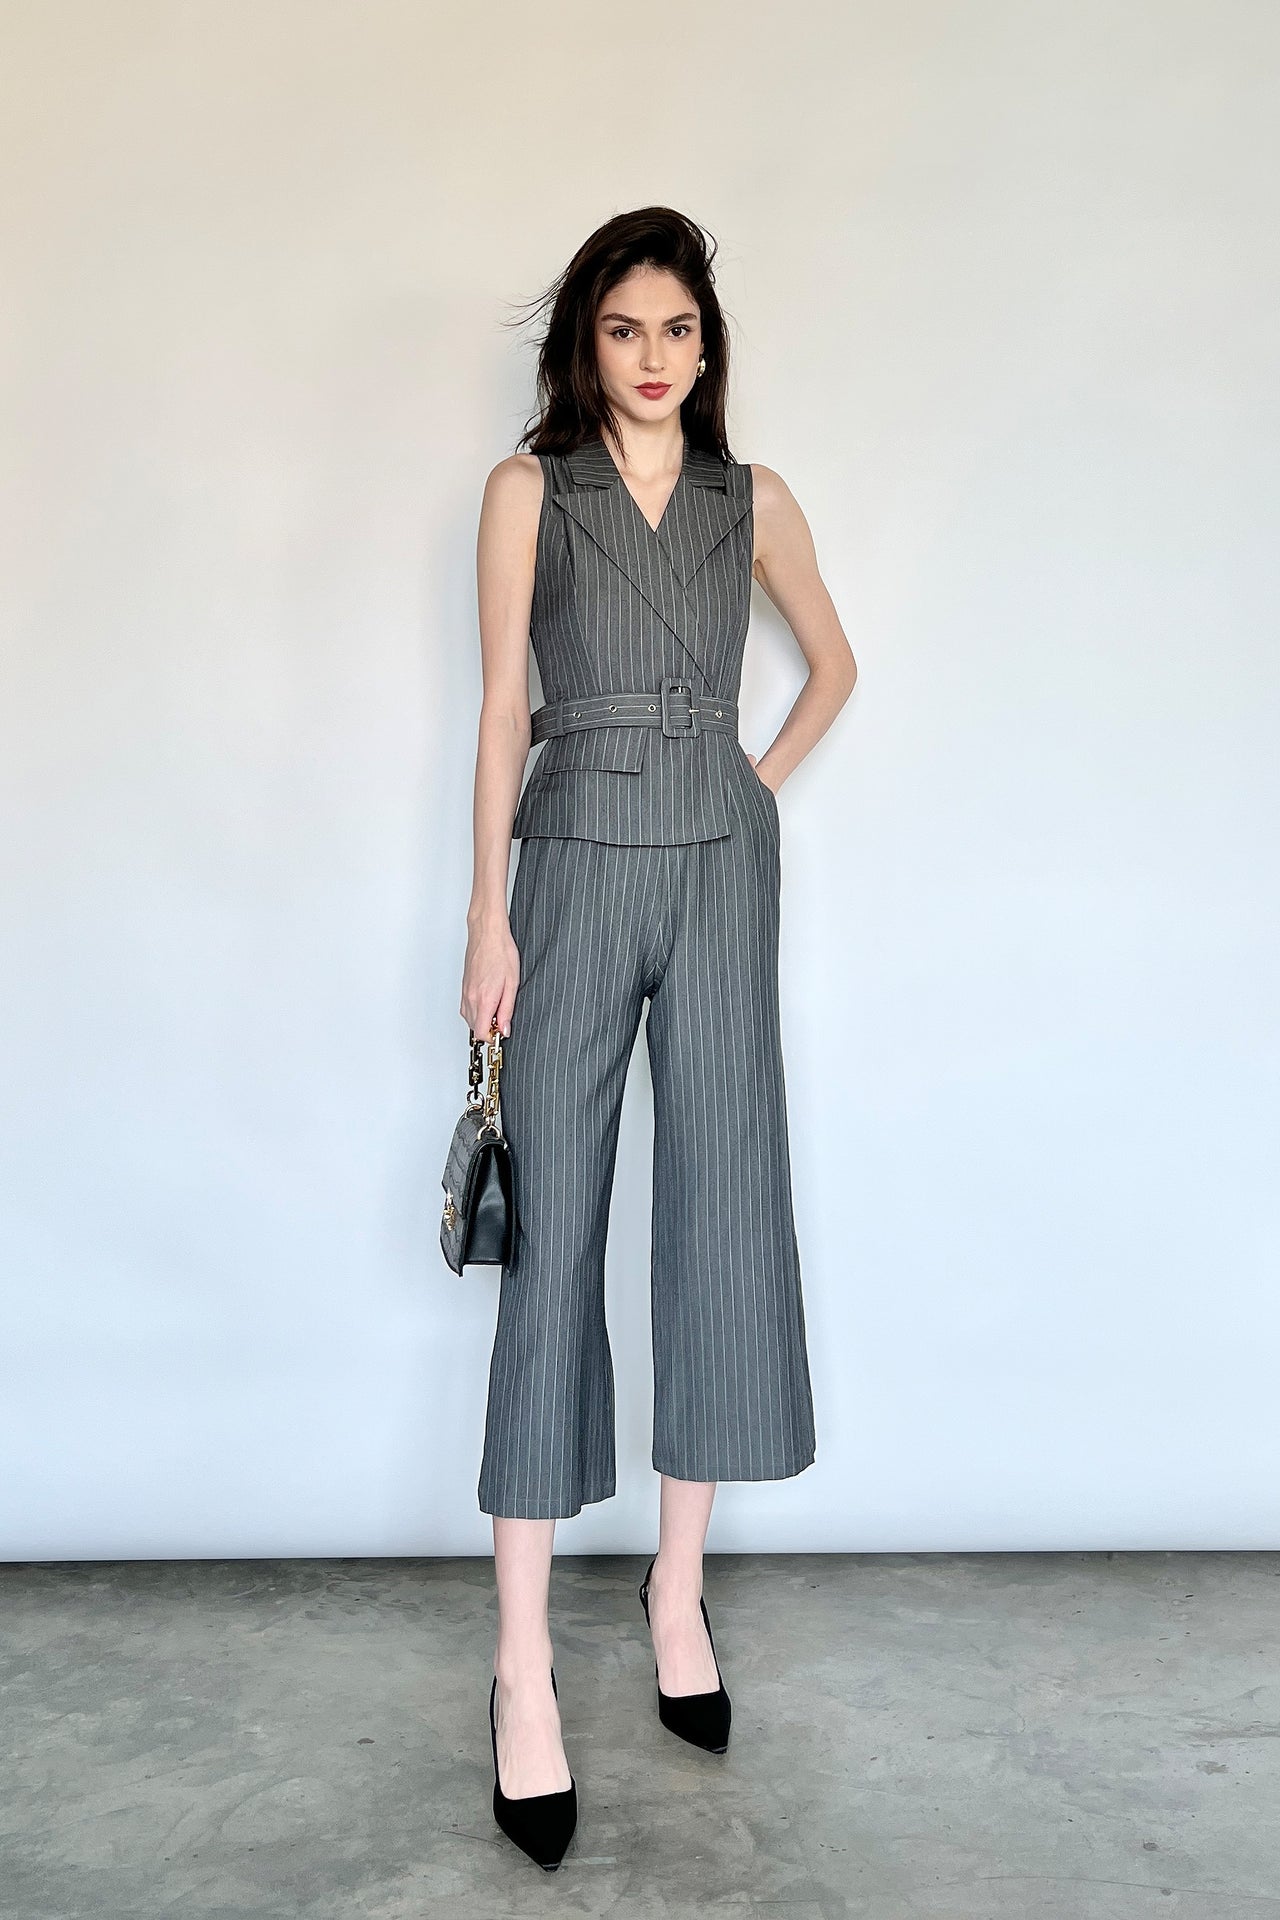 Herald Buckled Jumpsuit in Heather Grey Stripes - Arriving Soon